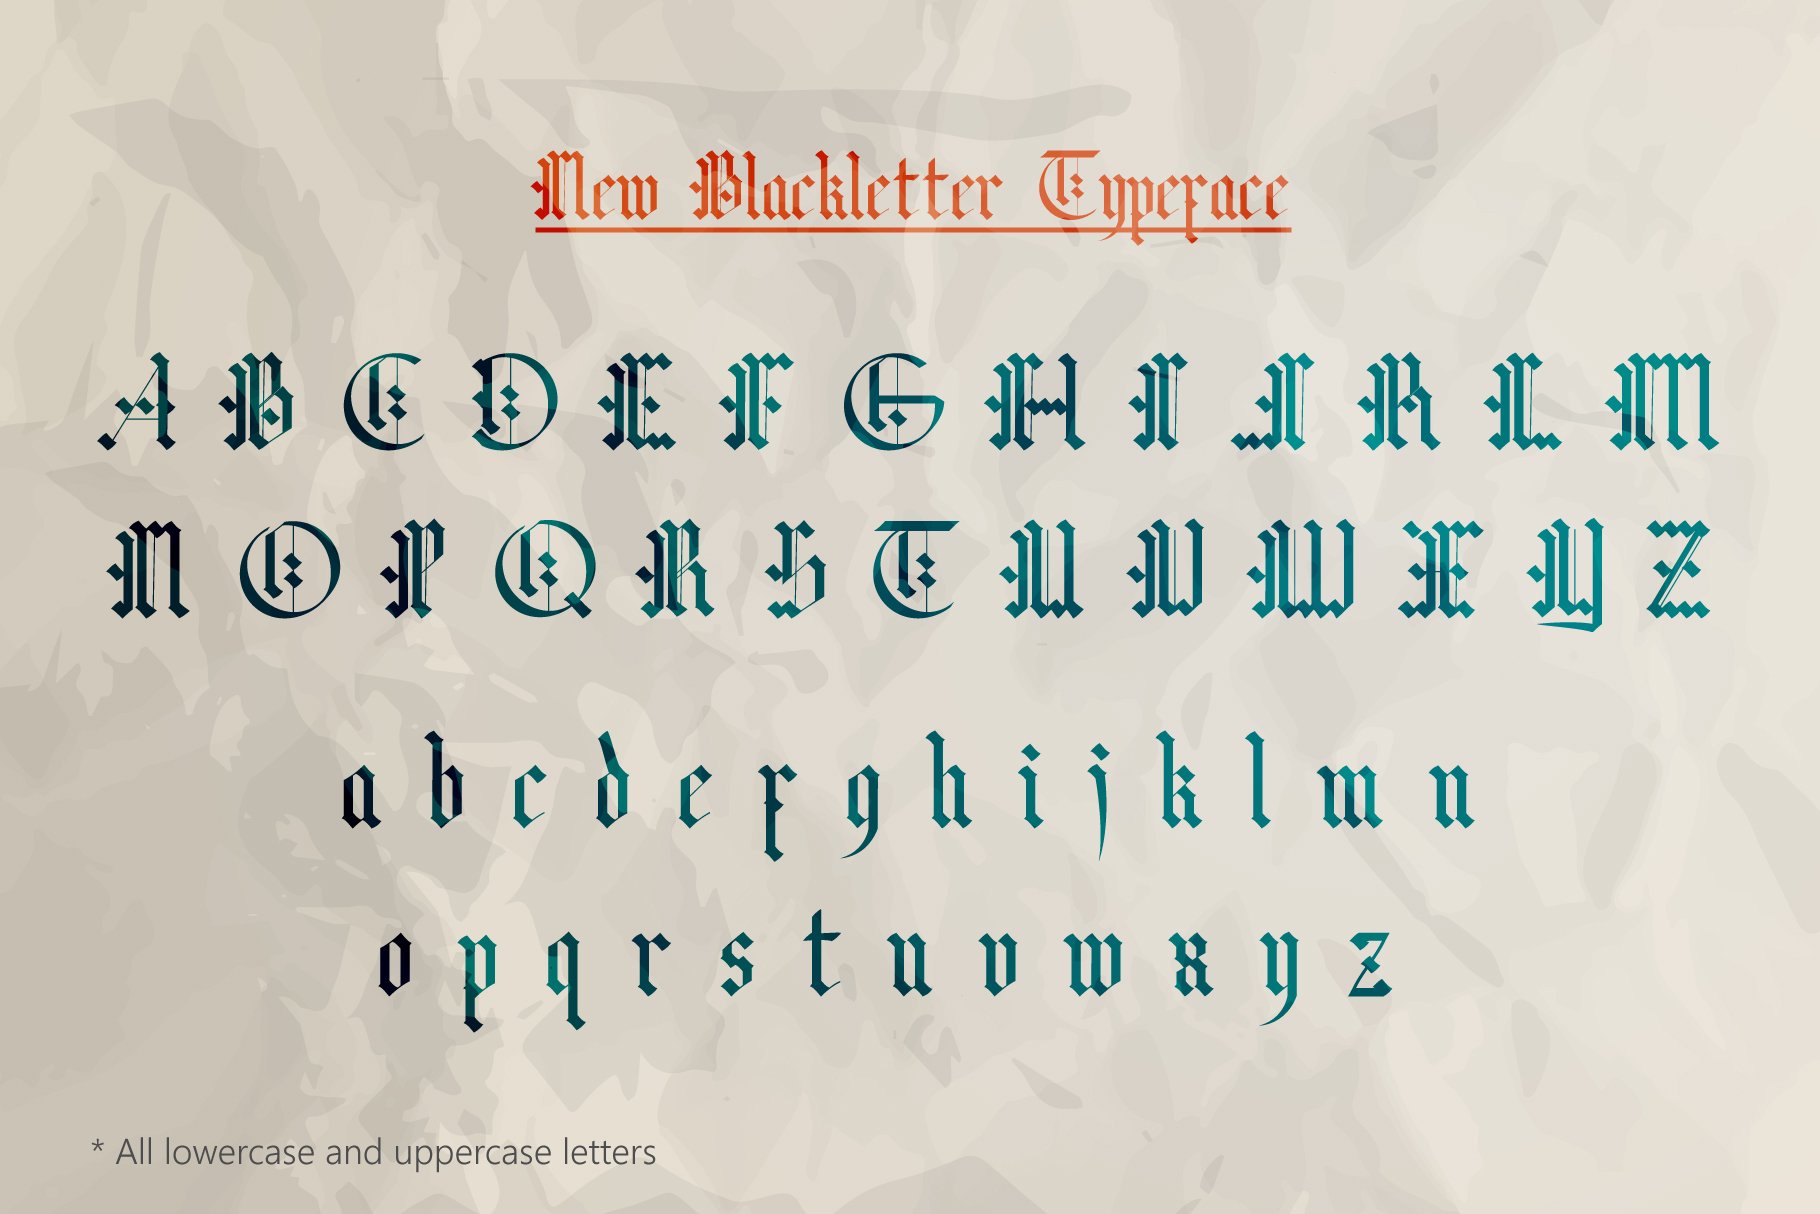 New Blackletter Typeface font. preview image.